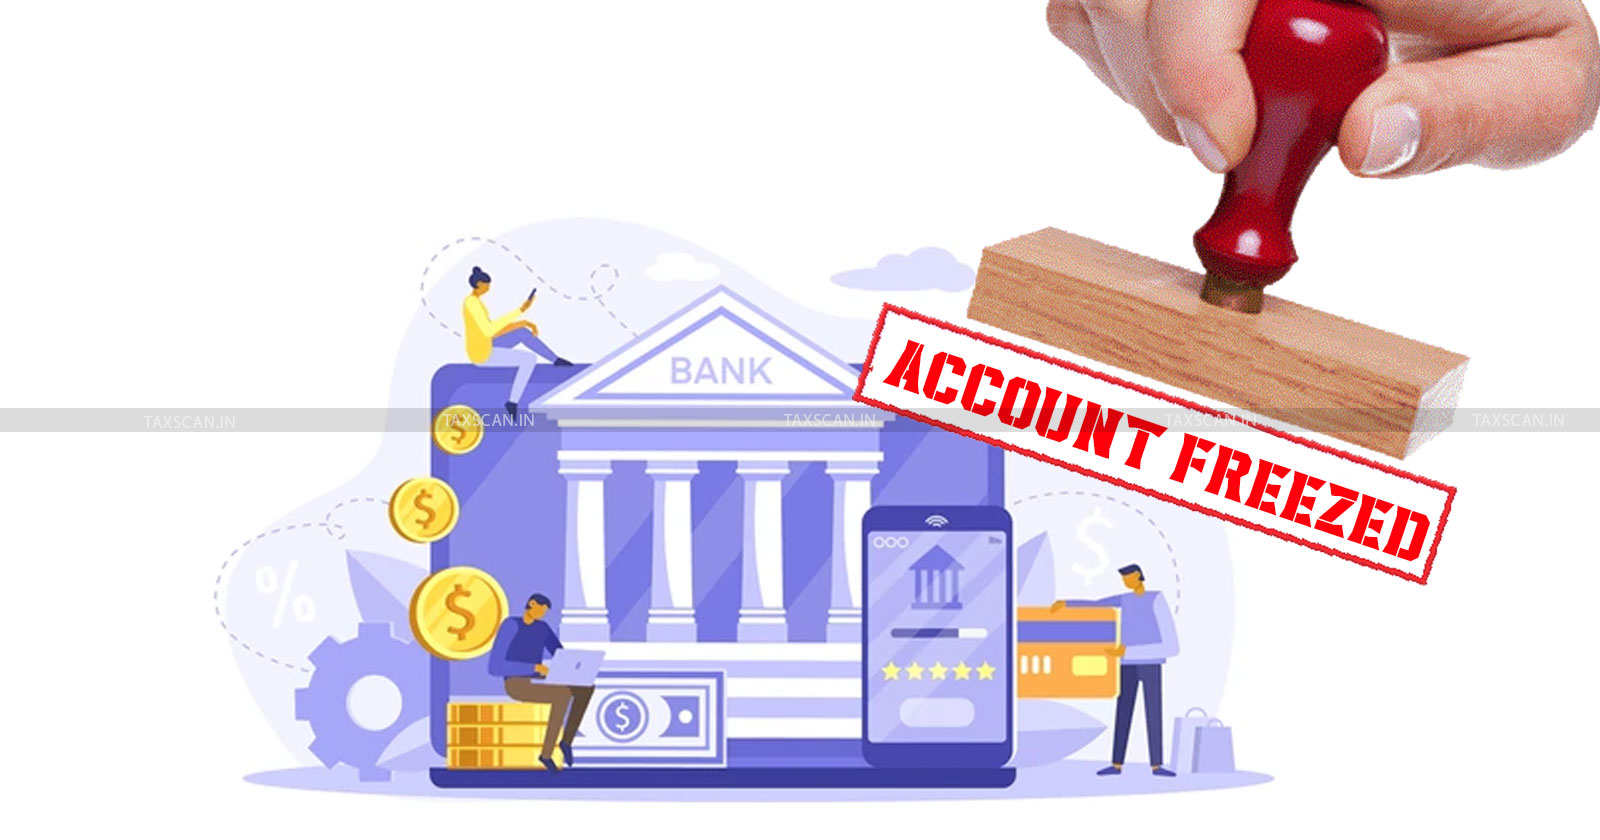 Delhi high court - freezing of bank accounts - Income tax acts - Section 132 - TAXSCAN